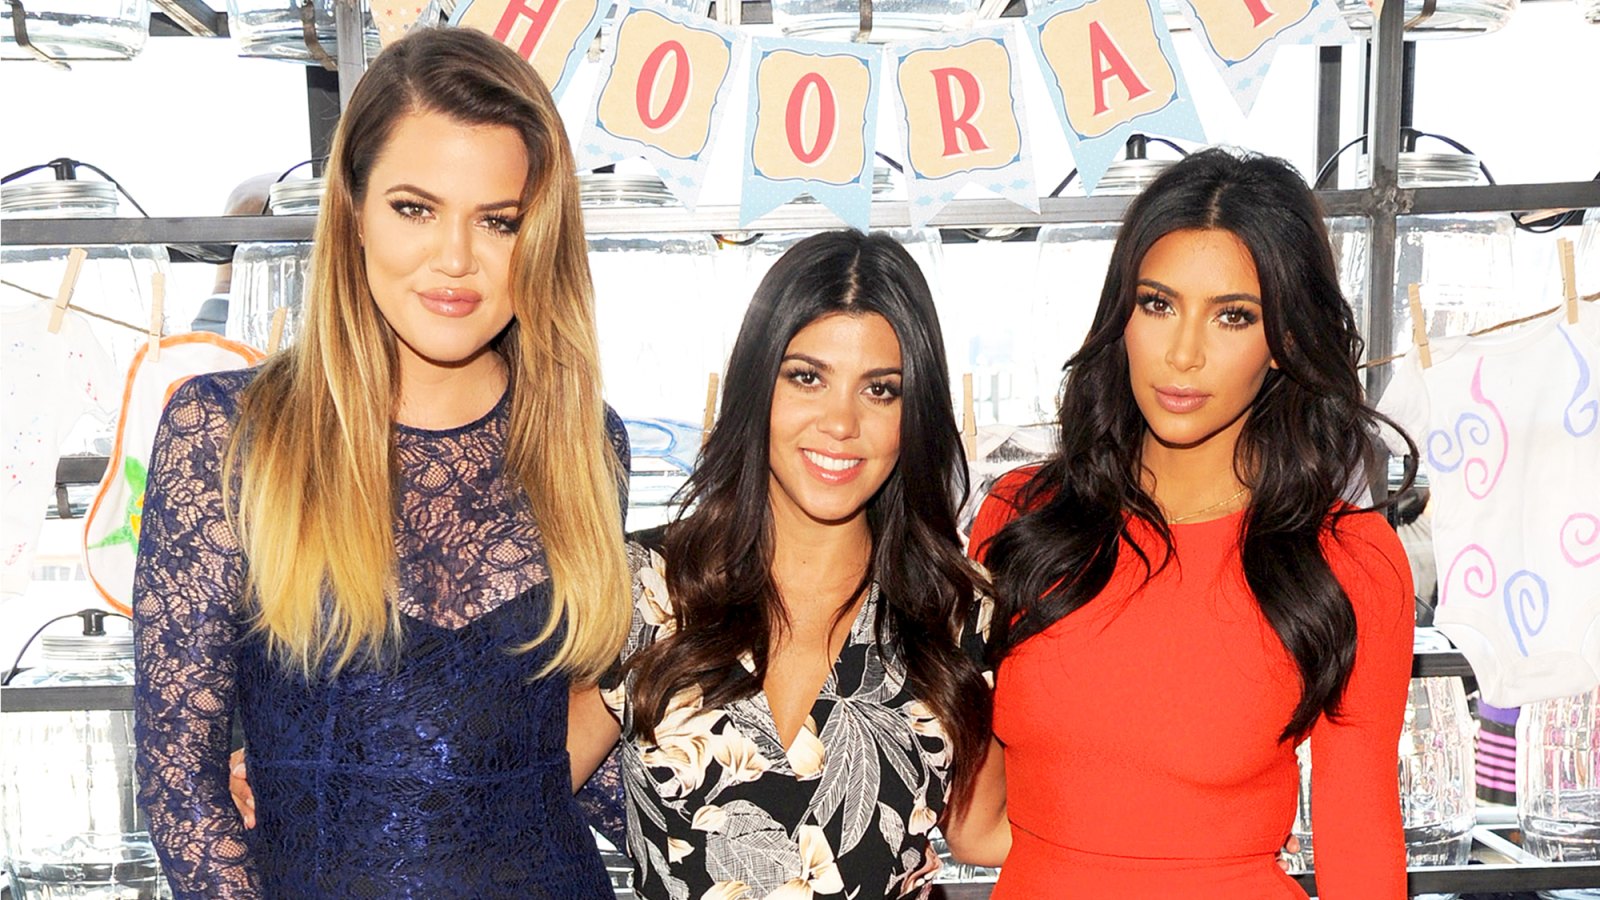 Khloe Kardashian, Kourtney Kardashian and Kim Kardashian joined Babies "R" Us to surprise military moms-to-be with gifts at an Operation Shower event at Battello in Jersey City, New Jersey.